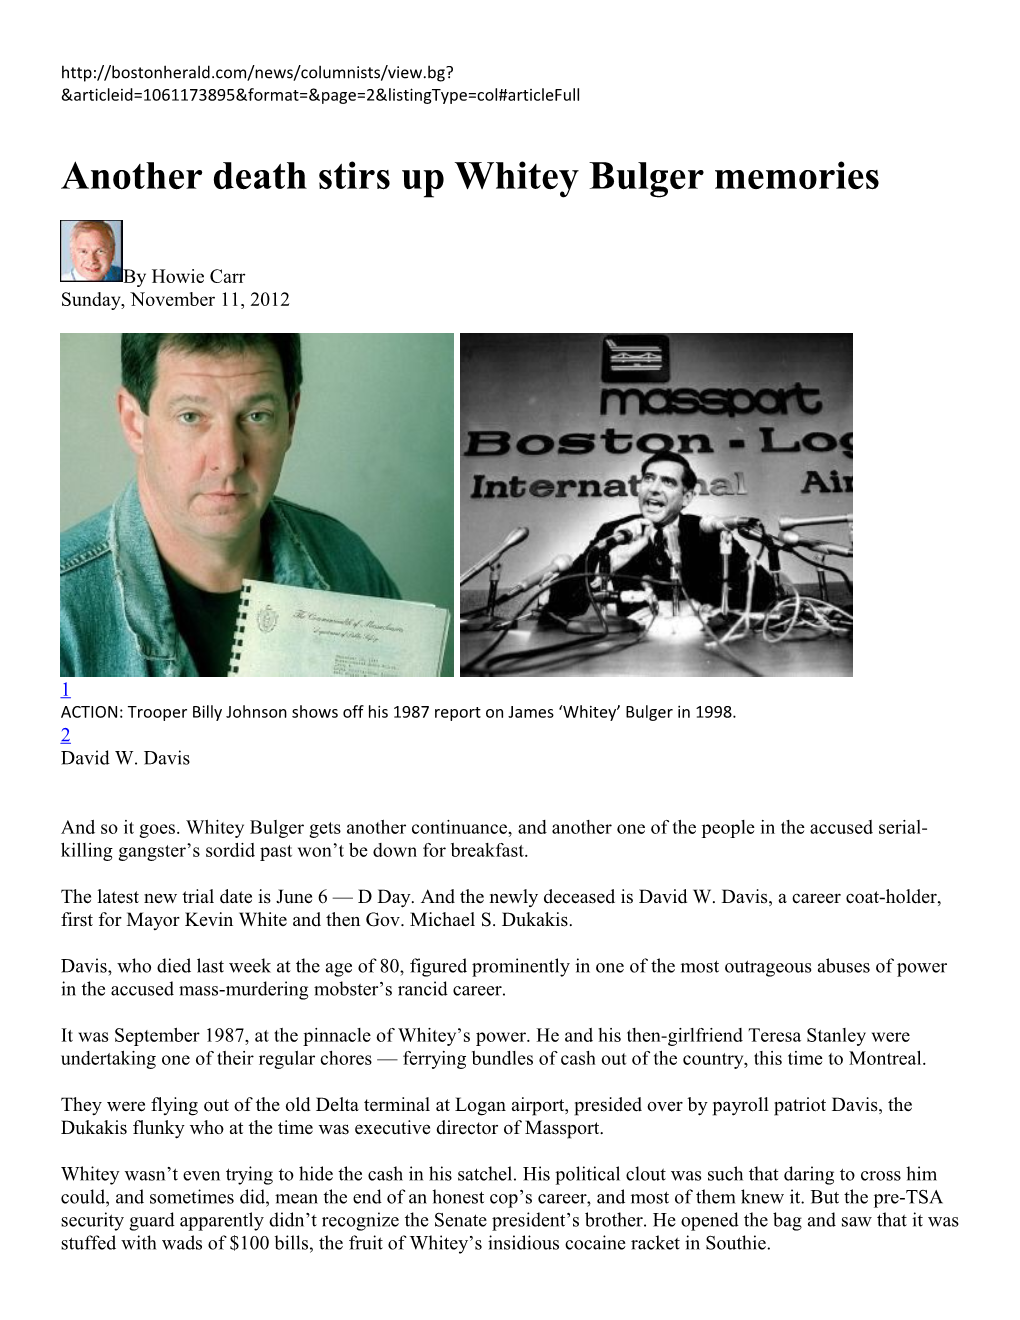 Another Death Stirs up Whitey Bulger Memories